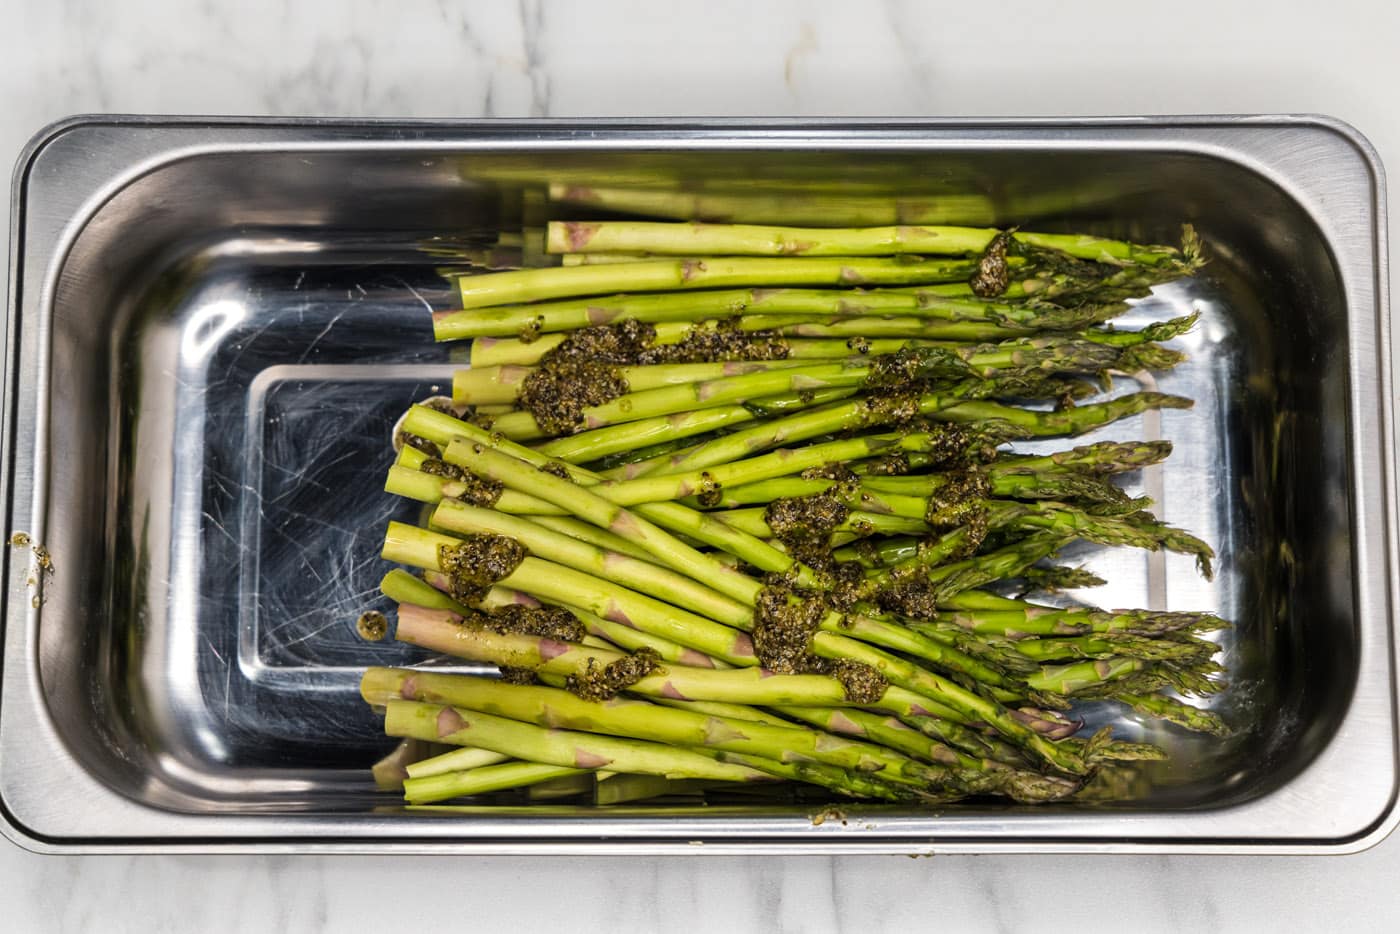 olive oil and seasonings on top of asparagus spears